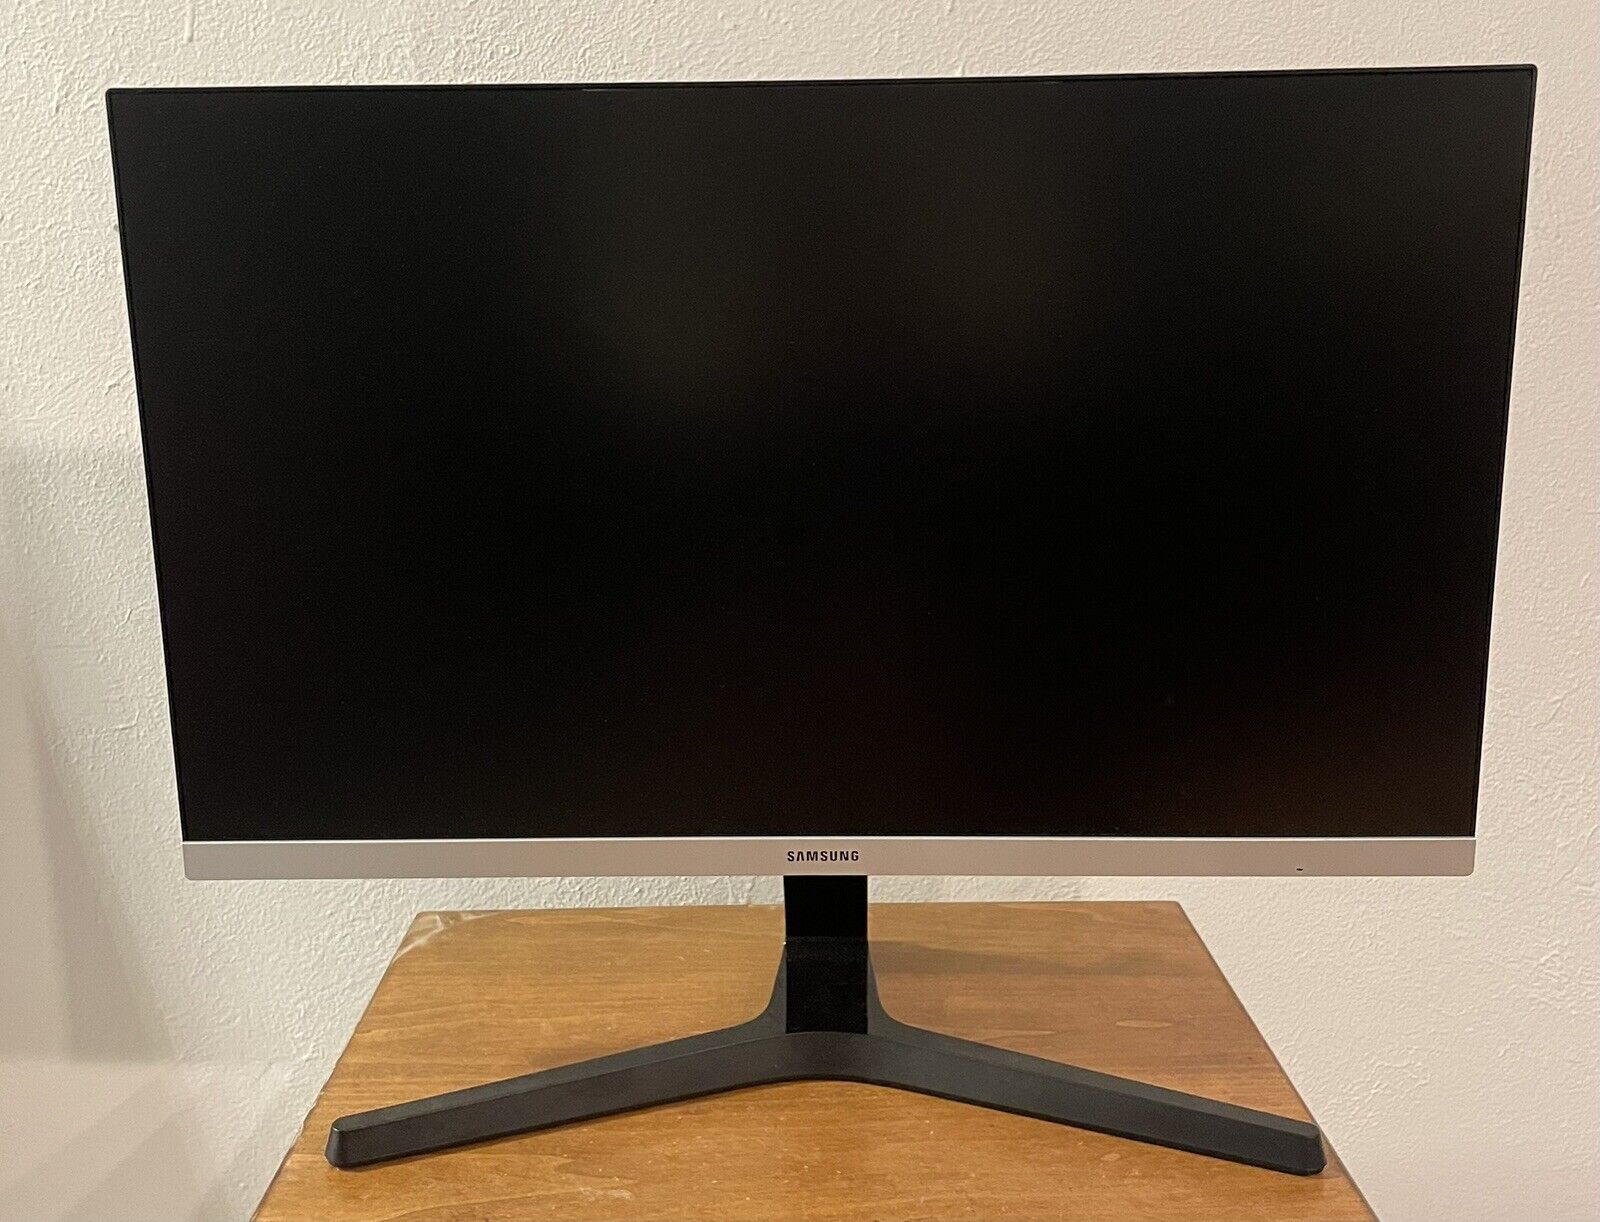 Samsung LS24R35AFHNXZA 24 inch Widescreen LED Computer Monitor 